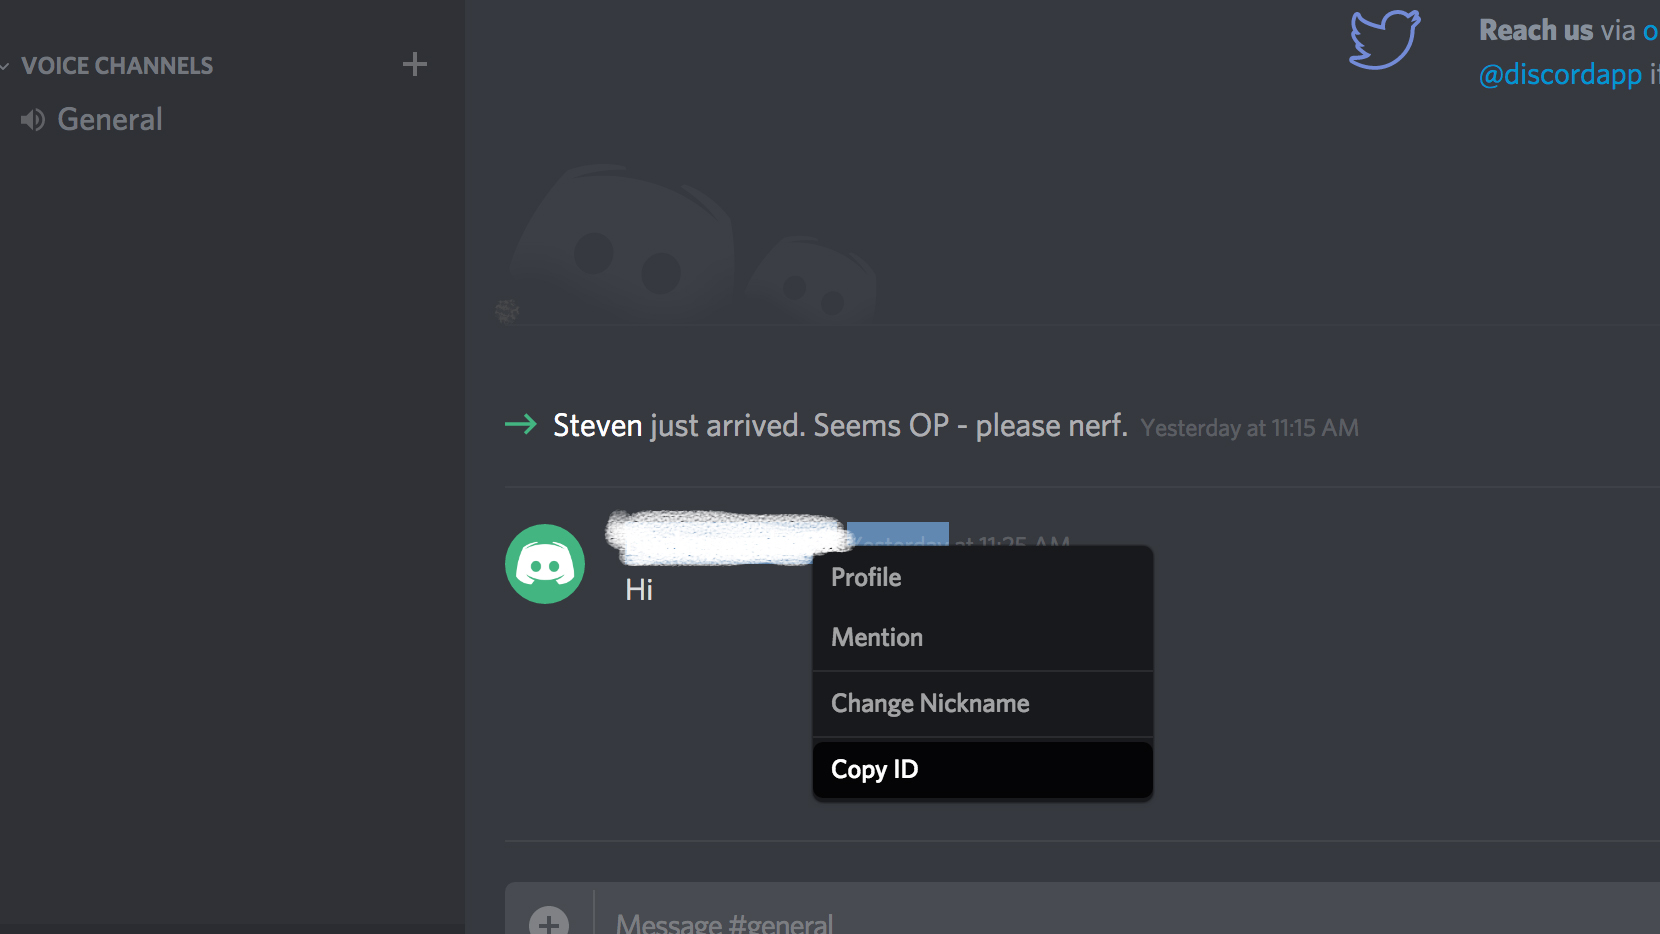 Discord rebrands itself as a general chat app, not just for gaming